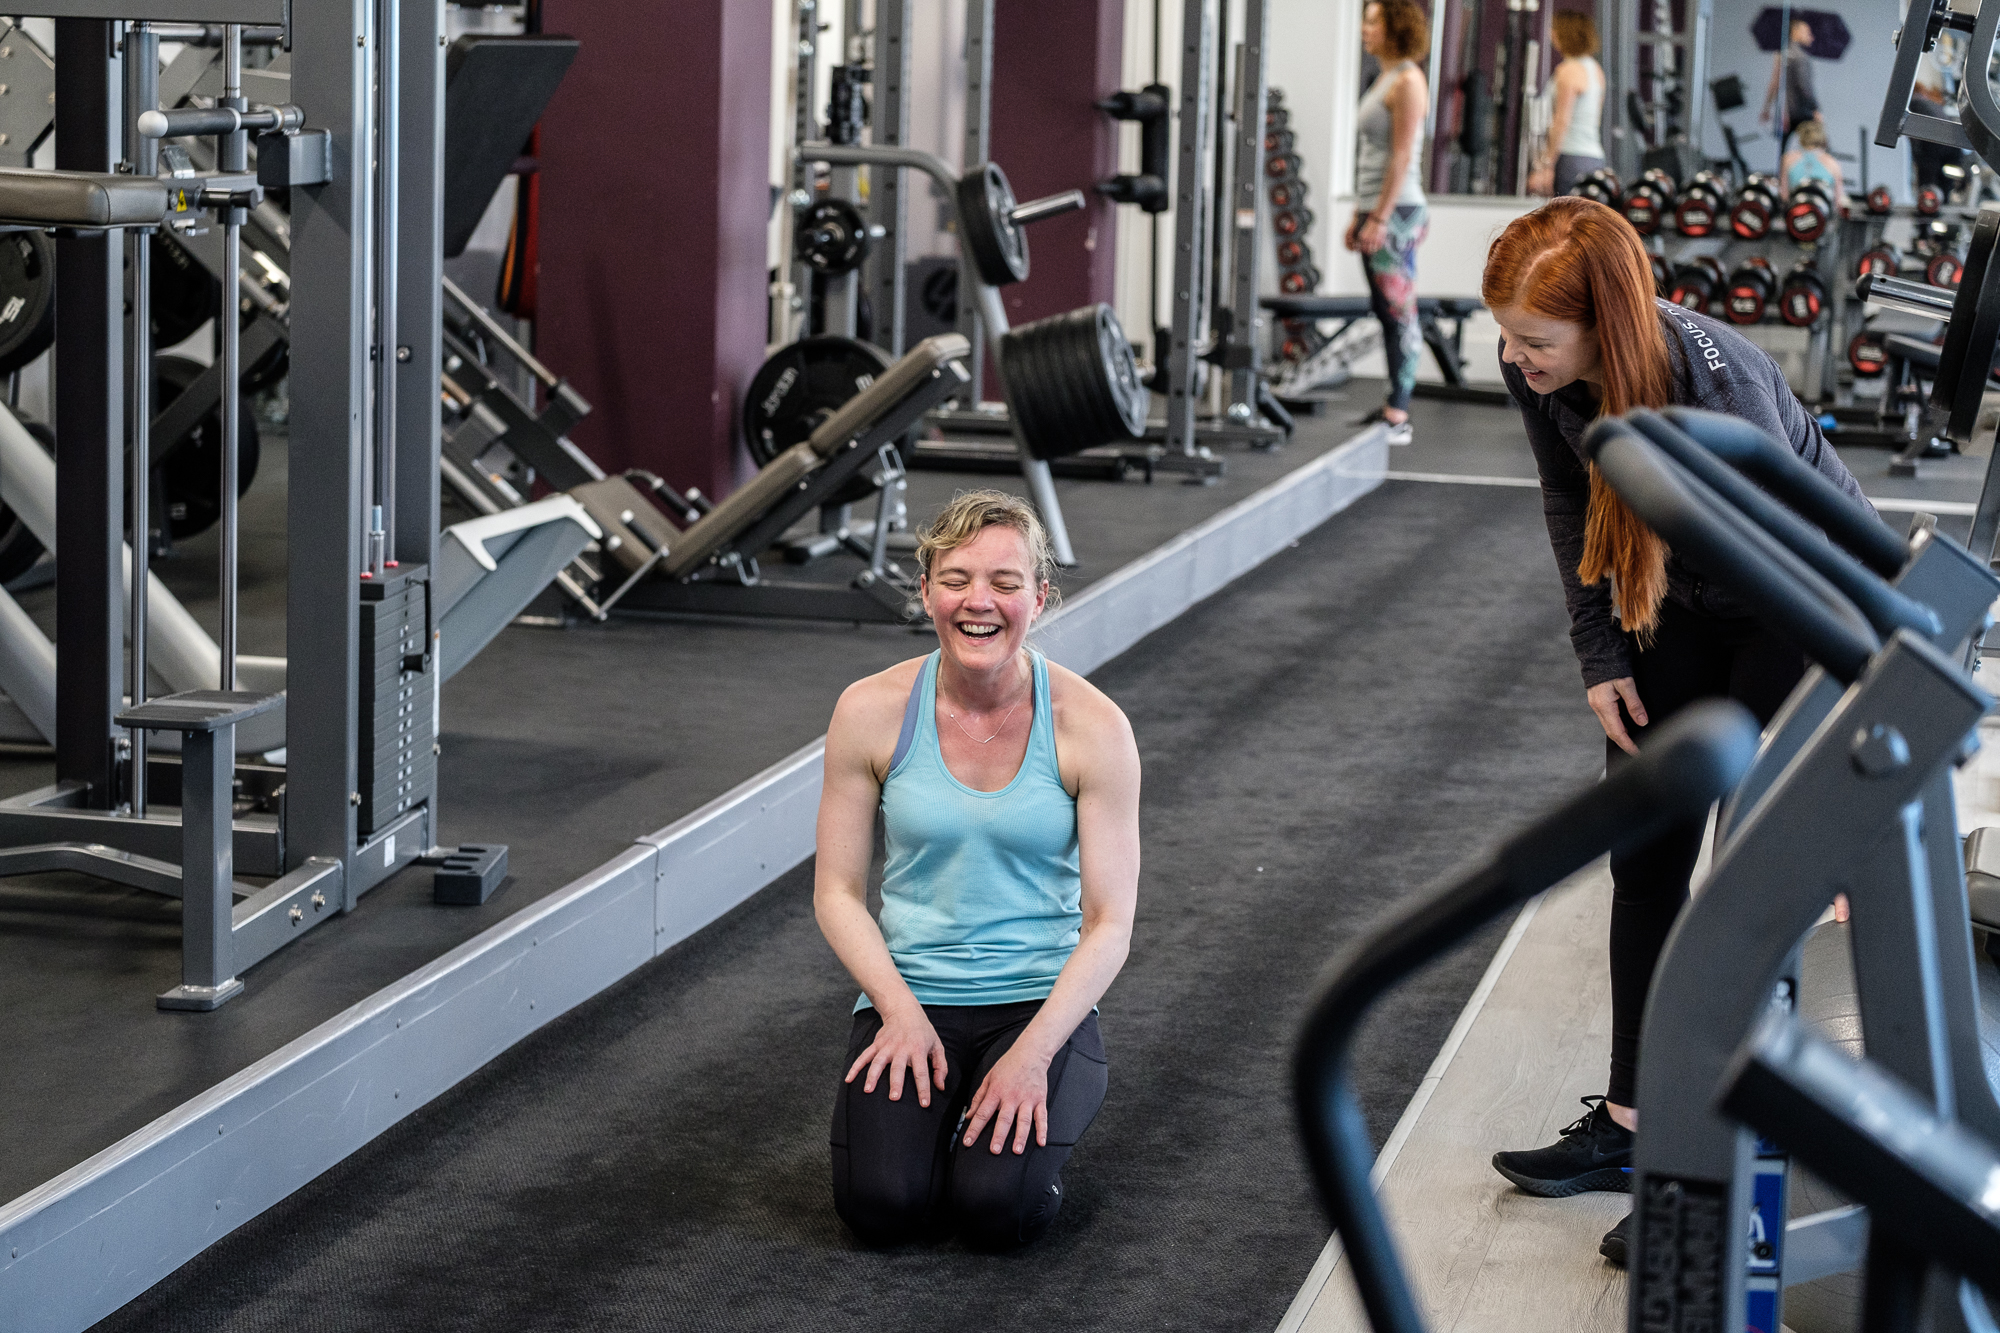 personal training manchester - session with Libby Smith